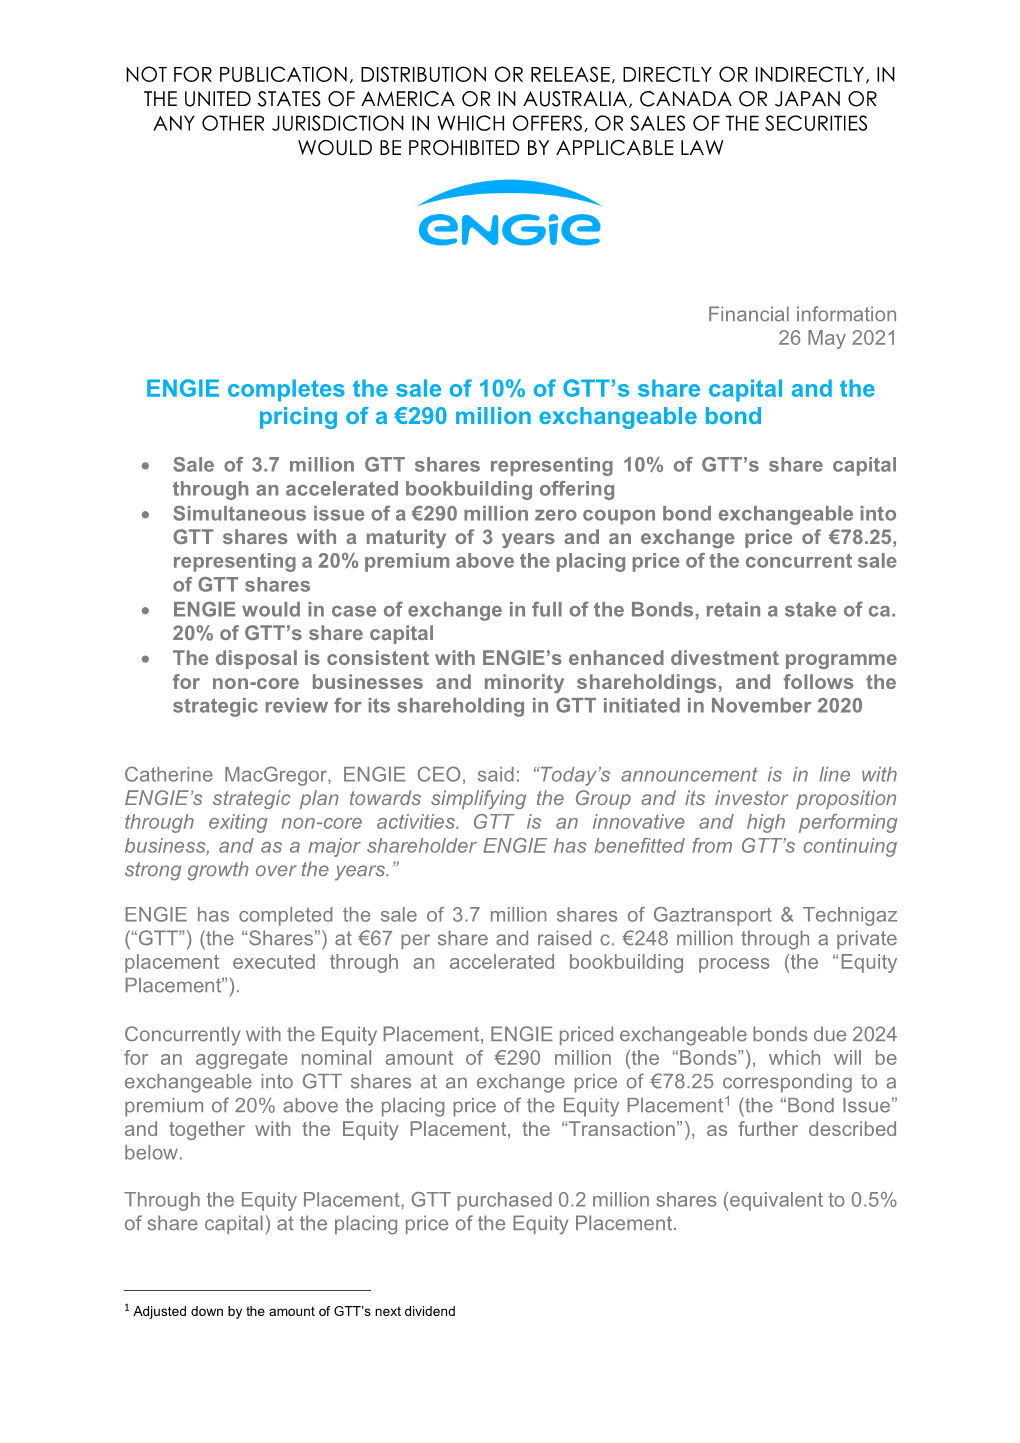 ENGIE Completes the Sale of 10% of GTT's Share Capital and the Pricing